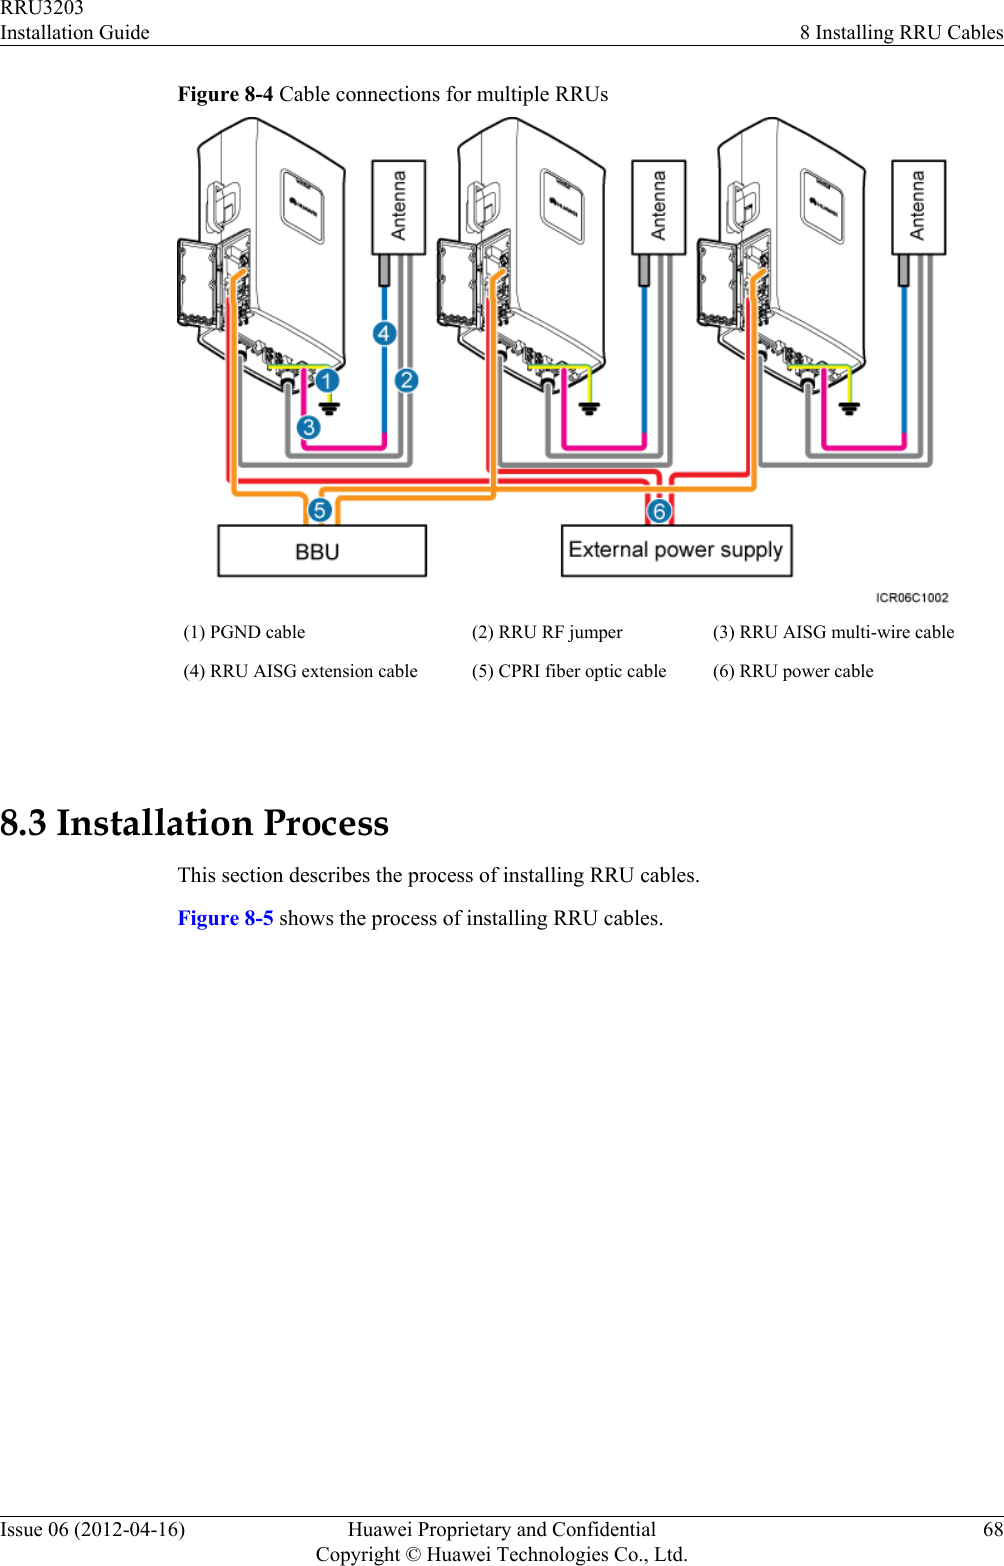 Figure 8-4 Cable connections for multiple RRUs(1) PGND cable (2) RRU RF jumper (3) RRU AISG multi-wire cable(4) RRU AISG extension cable (5) CPRI fiber optic cable (6) RRU power cable 8.3 Installation ProcessThis section describes the process of installing RRU cables.Figure 8-5 shows the process of installing RRU cables.RRU3203Installation Guide 8 Installing RRU CablesIssue 06 (2012-04-16) Huawei Proprietary and ConfidentialCopyright © Huawei Technologies Co., Ltd.68